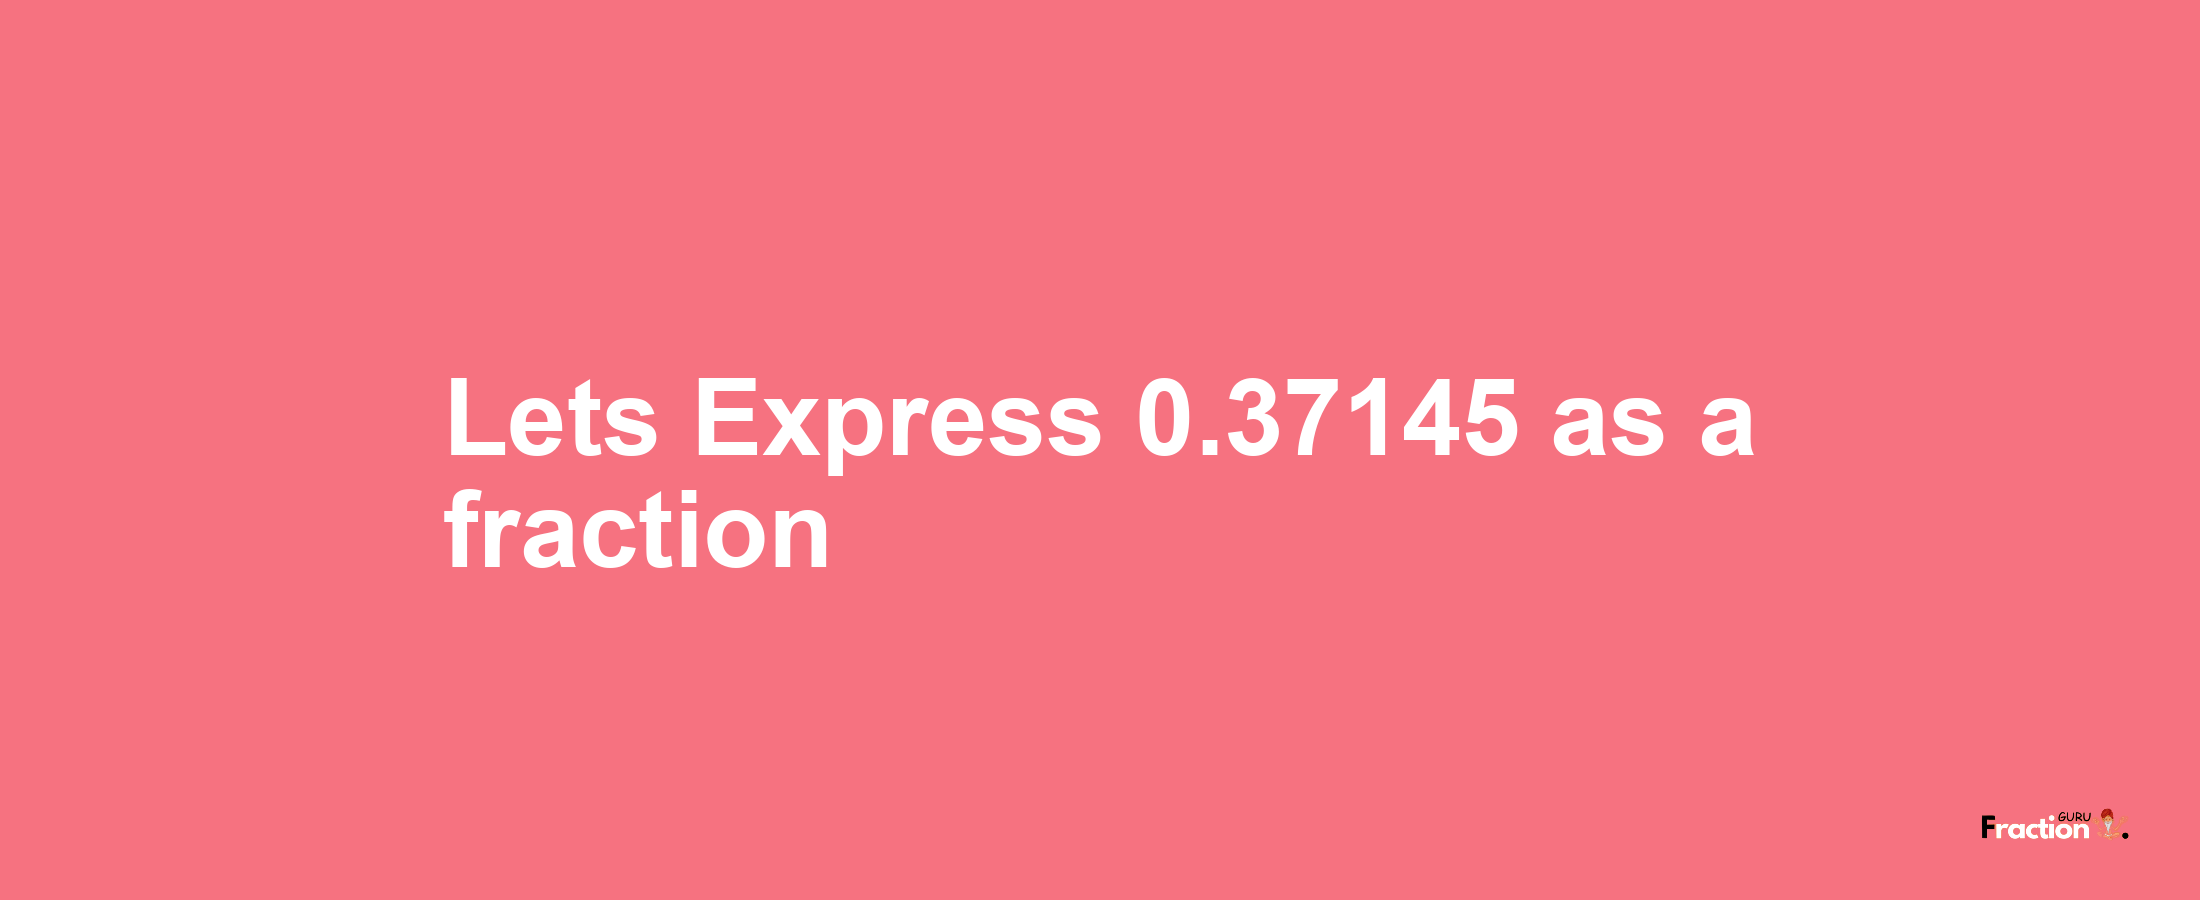 Lets Express 0.37145 as afraction